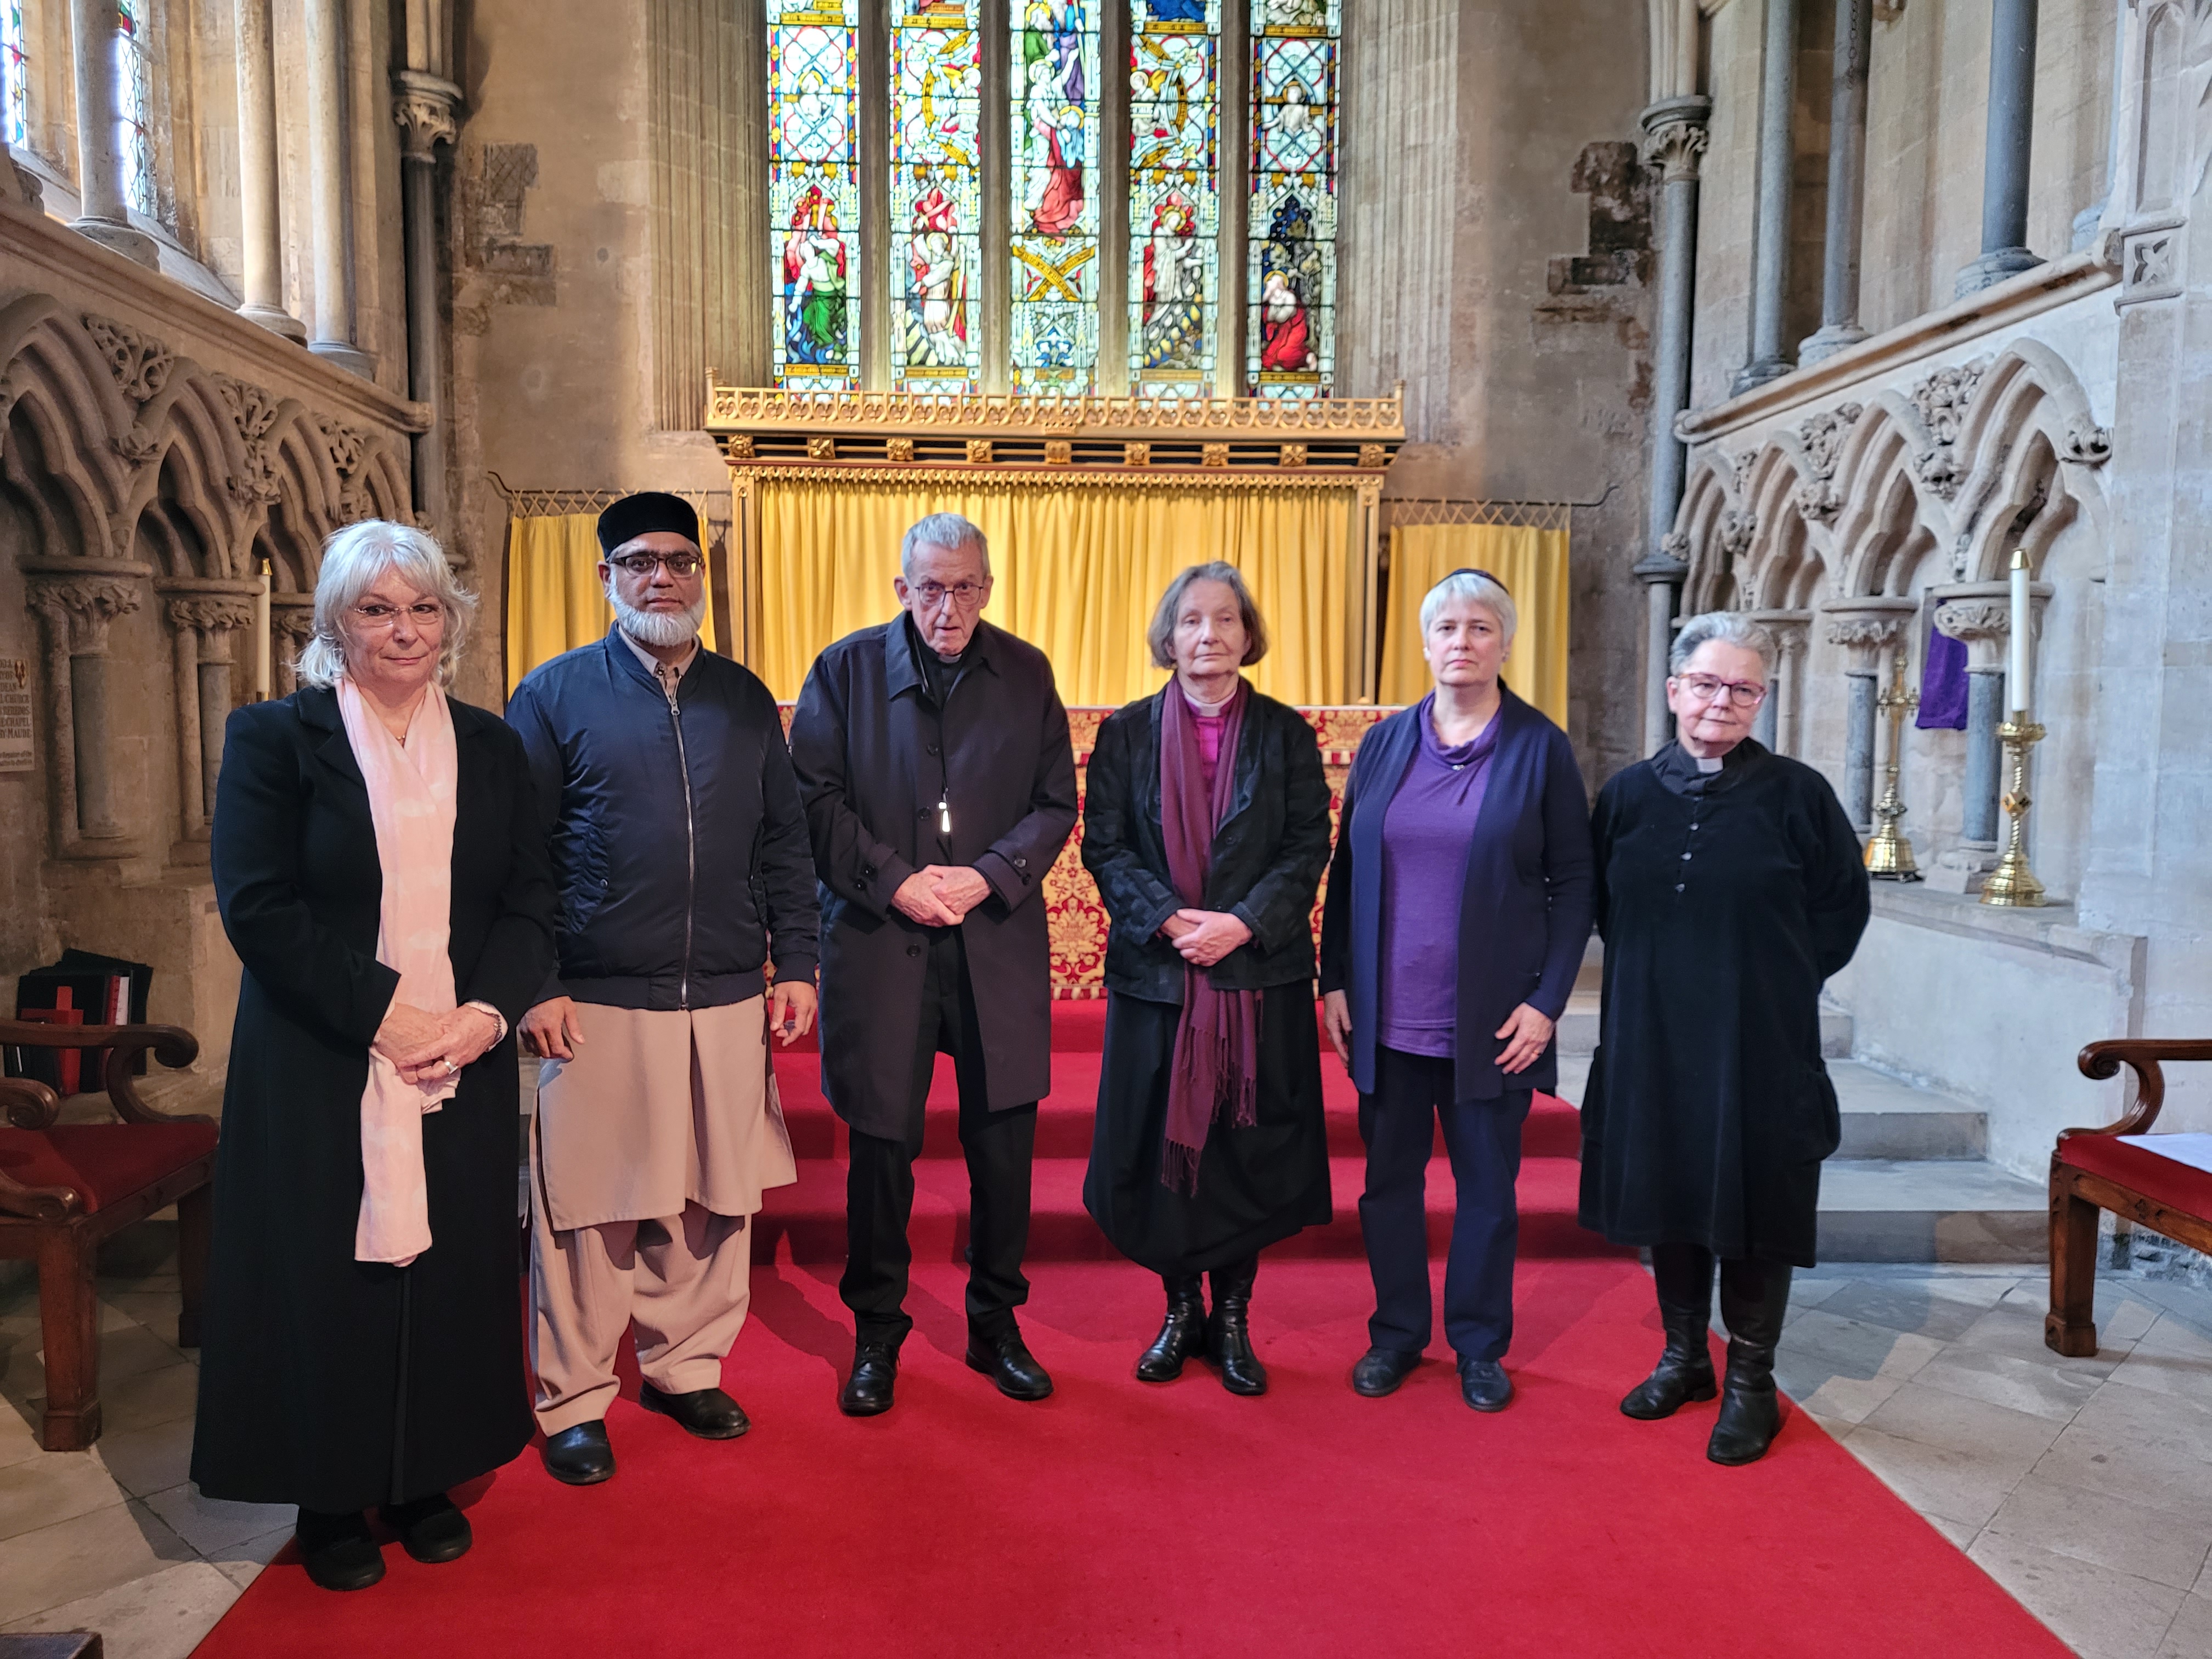 (L-r: Carol Simmons from Park Row Synagogue, Zaheer Shabir from Building the Bridge, Bishop Declan Lang, Bishop Vivienne Faull, Rabbi Monique Mayer and Dean Mandy Ford